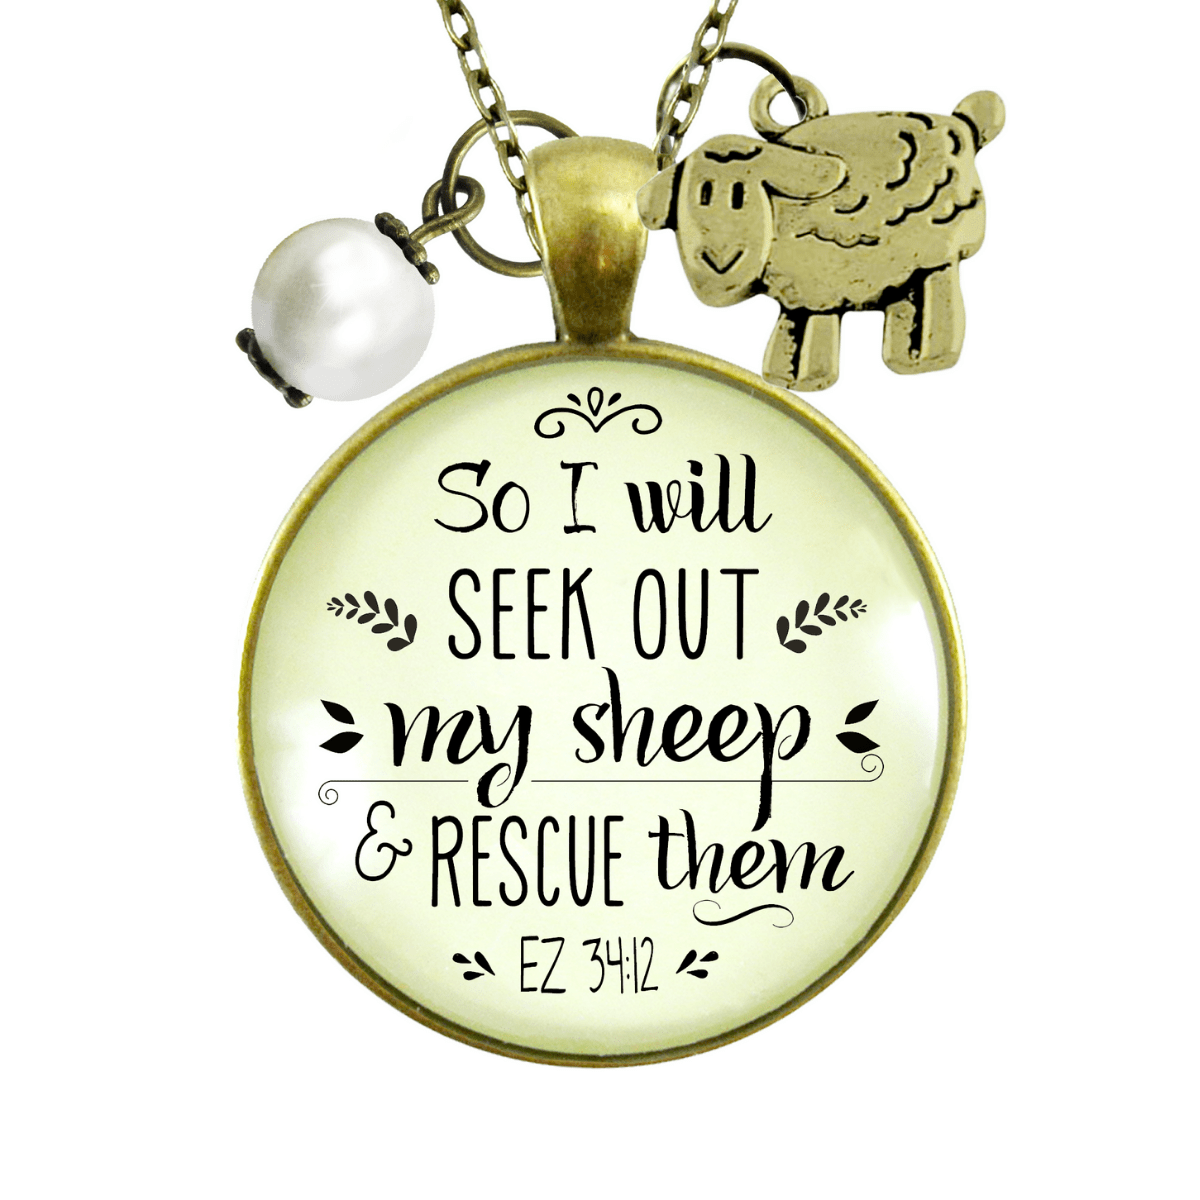 Gutsy Goodness Christian Necklace So I Will Seek Out My Sheep Jewelry Lamb Charm - Gutsy Goodness;Christian Necklace So I Will Seek Out My Sheep Jewelry Lamb Charm - Gutsy Goodness Handmade Jewelry Gifts